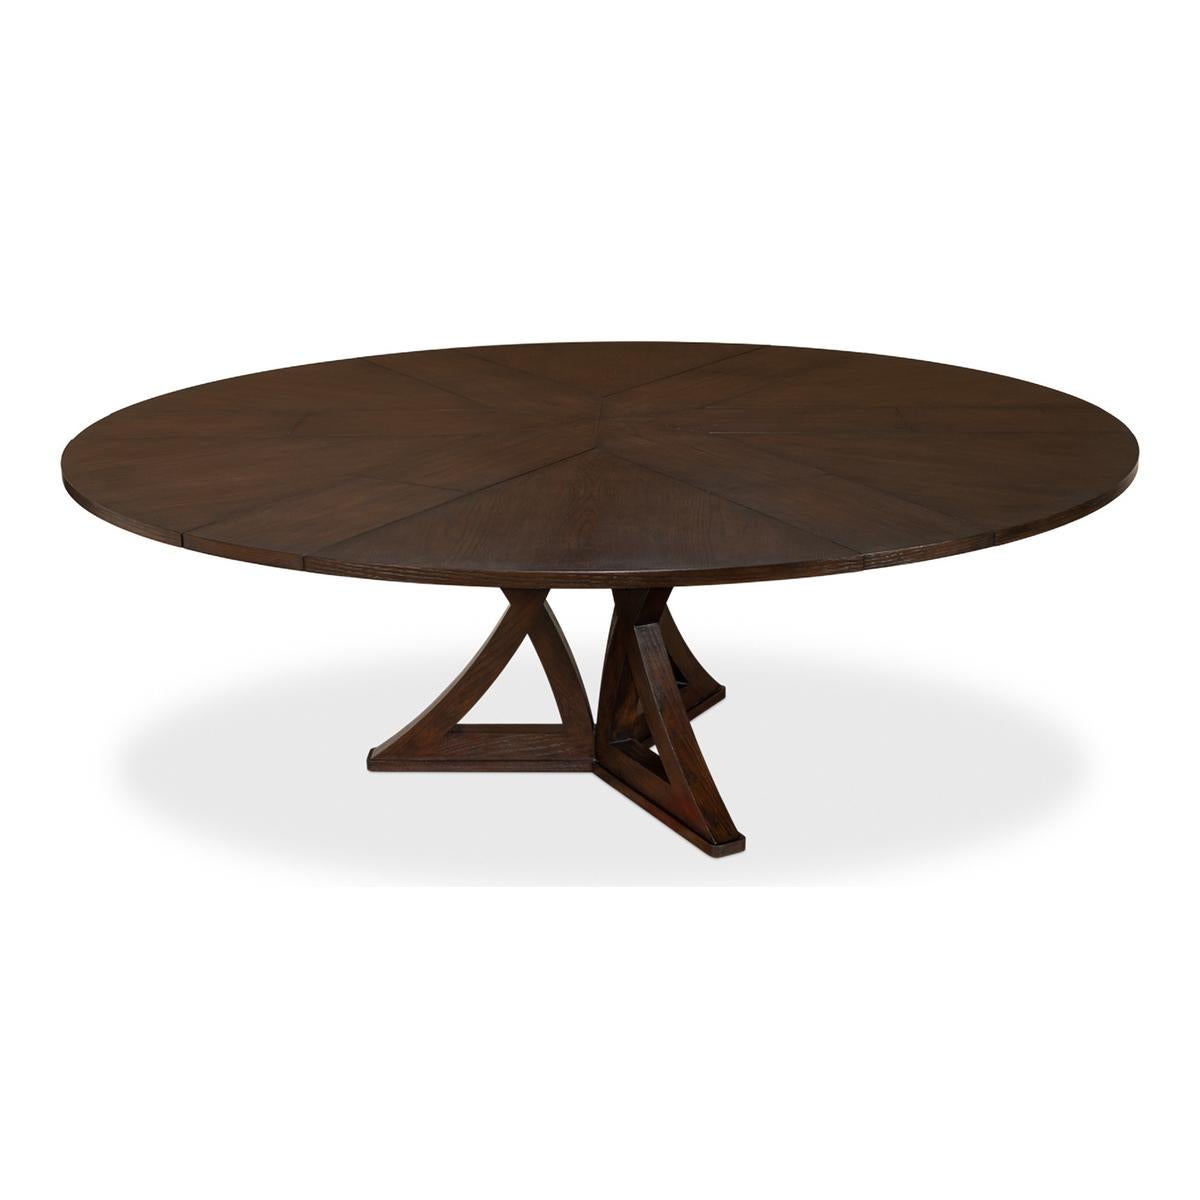 Rustic Round Dining Table, Burnt Brown Oak In New Condition For Sale In Westwood, NJ